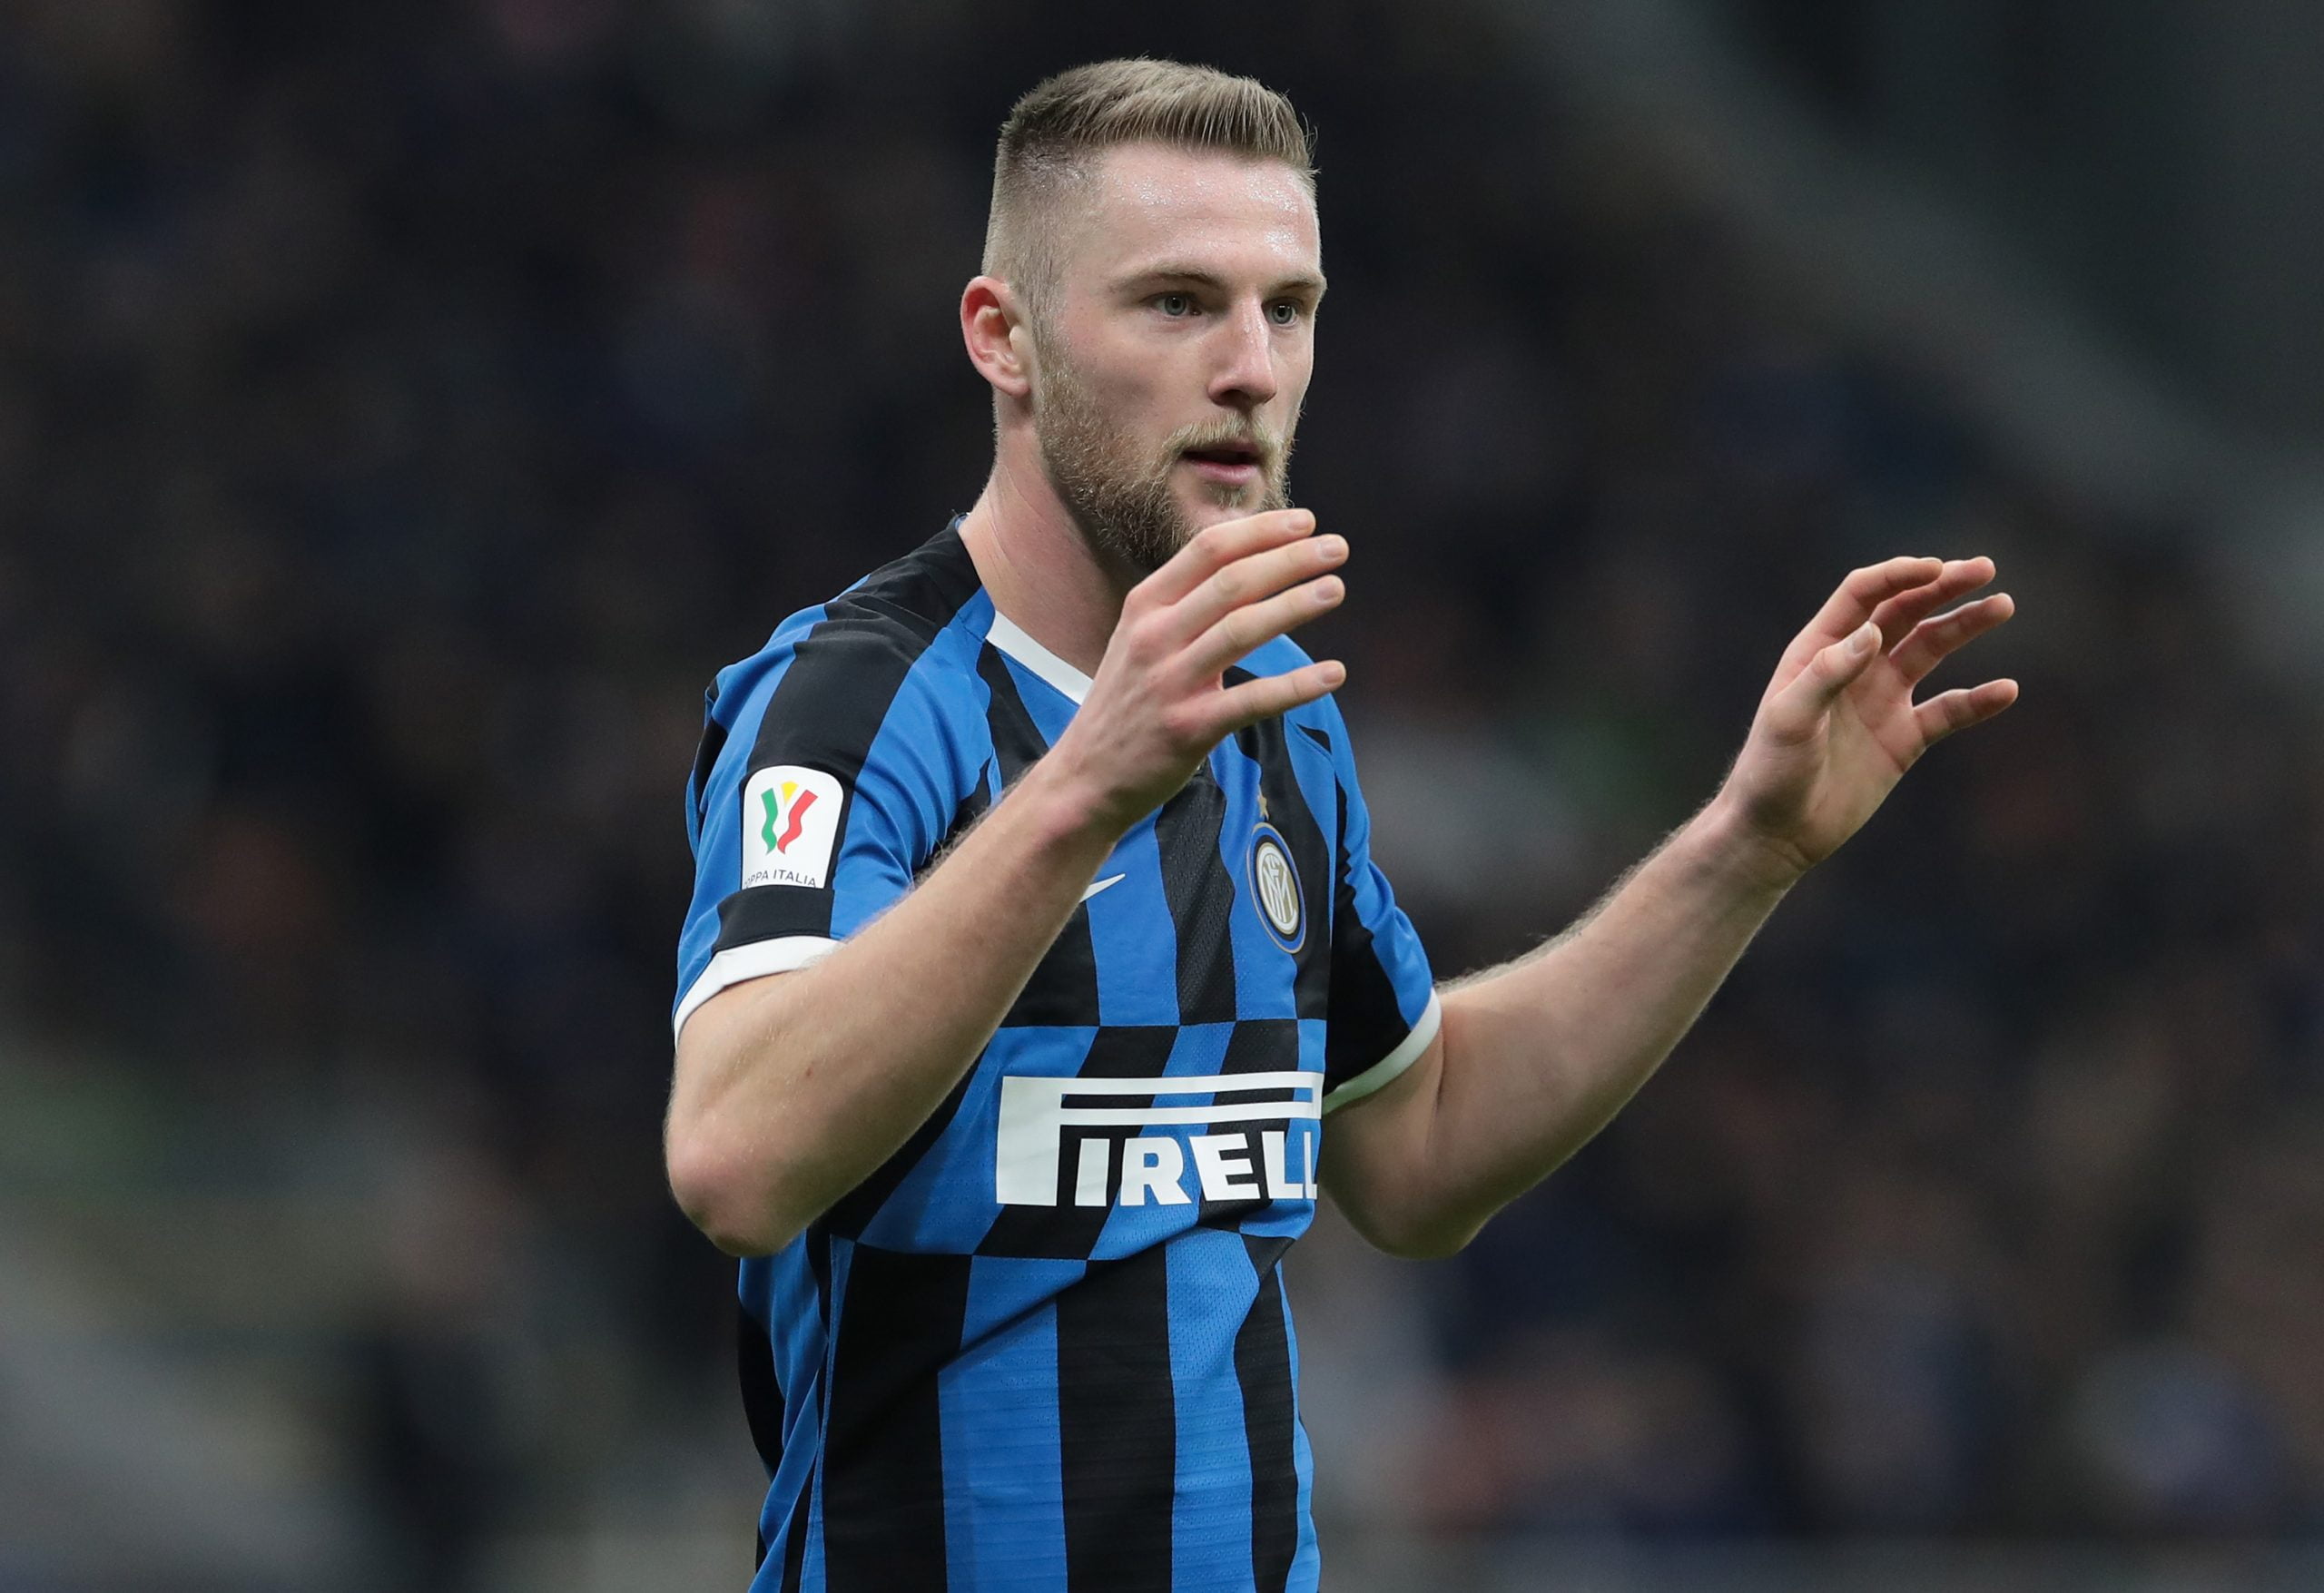 Manchester United positioning themselves to recruit Skriniar who is seen in the photo